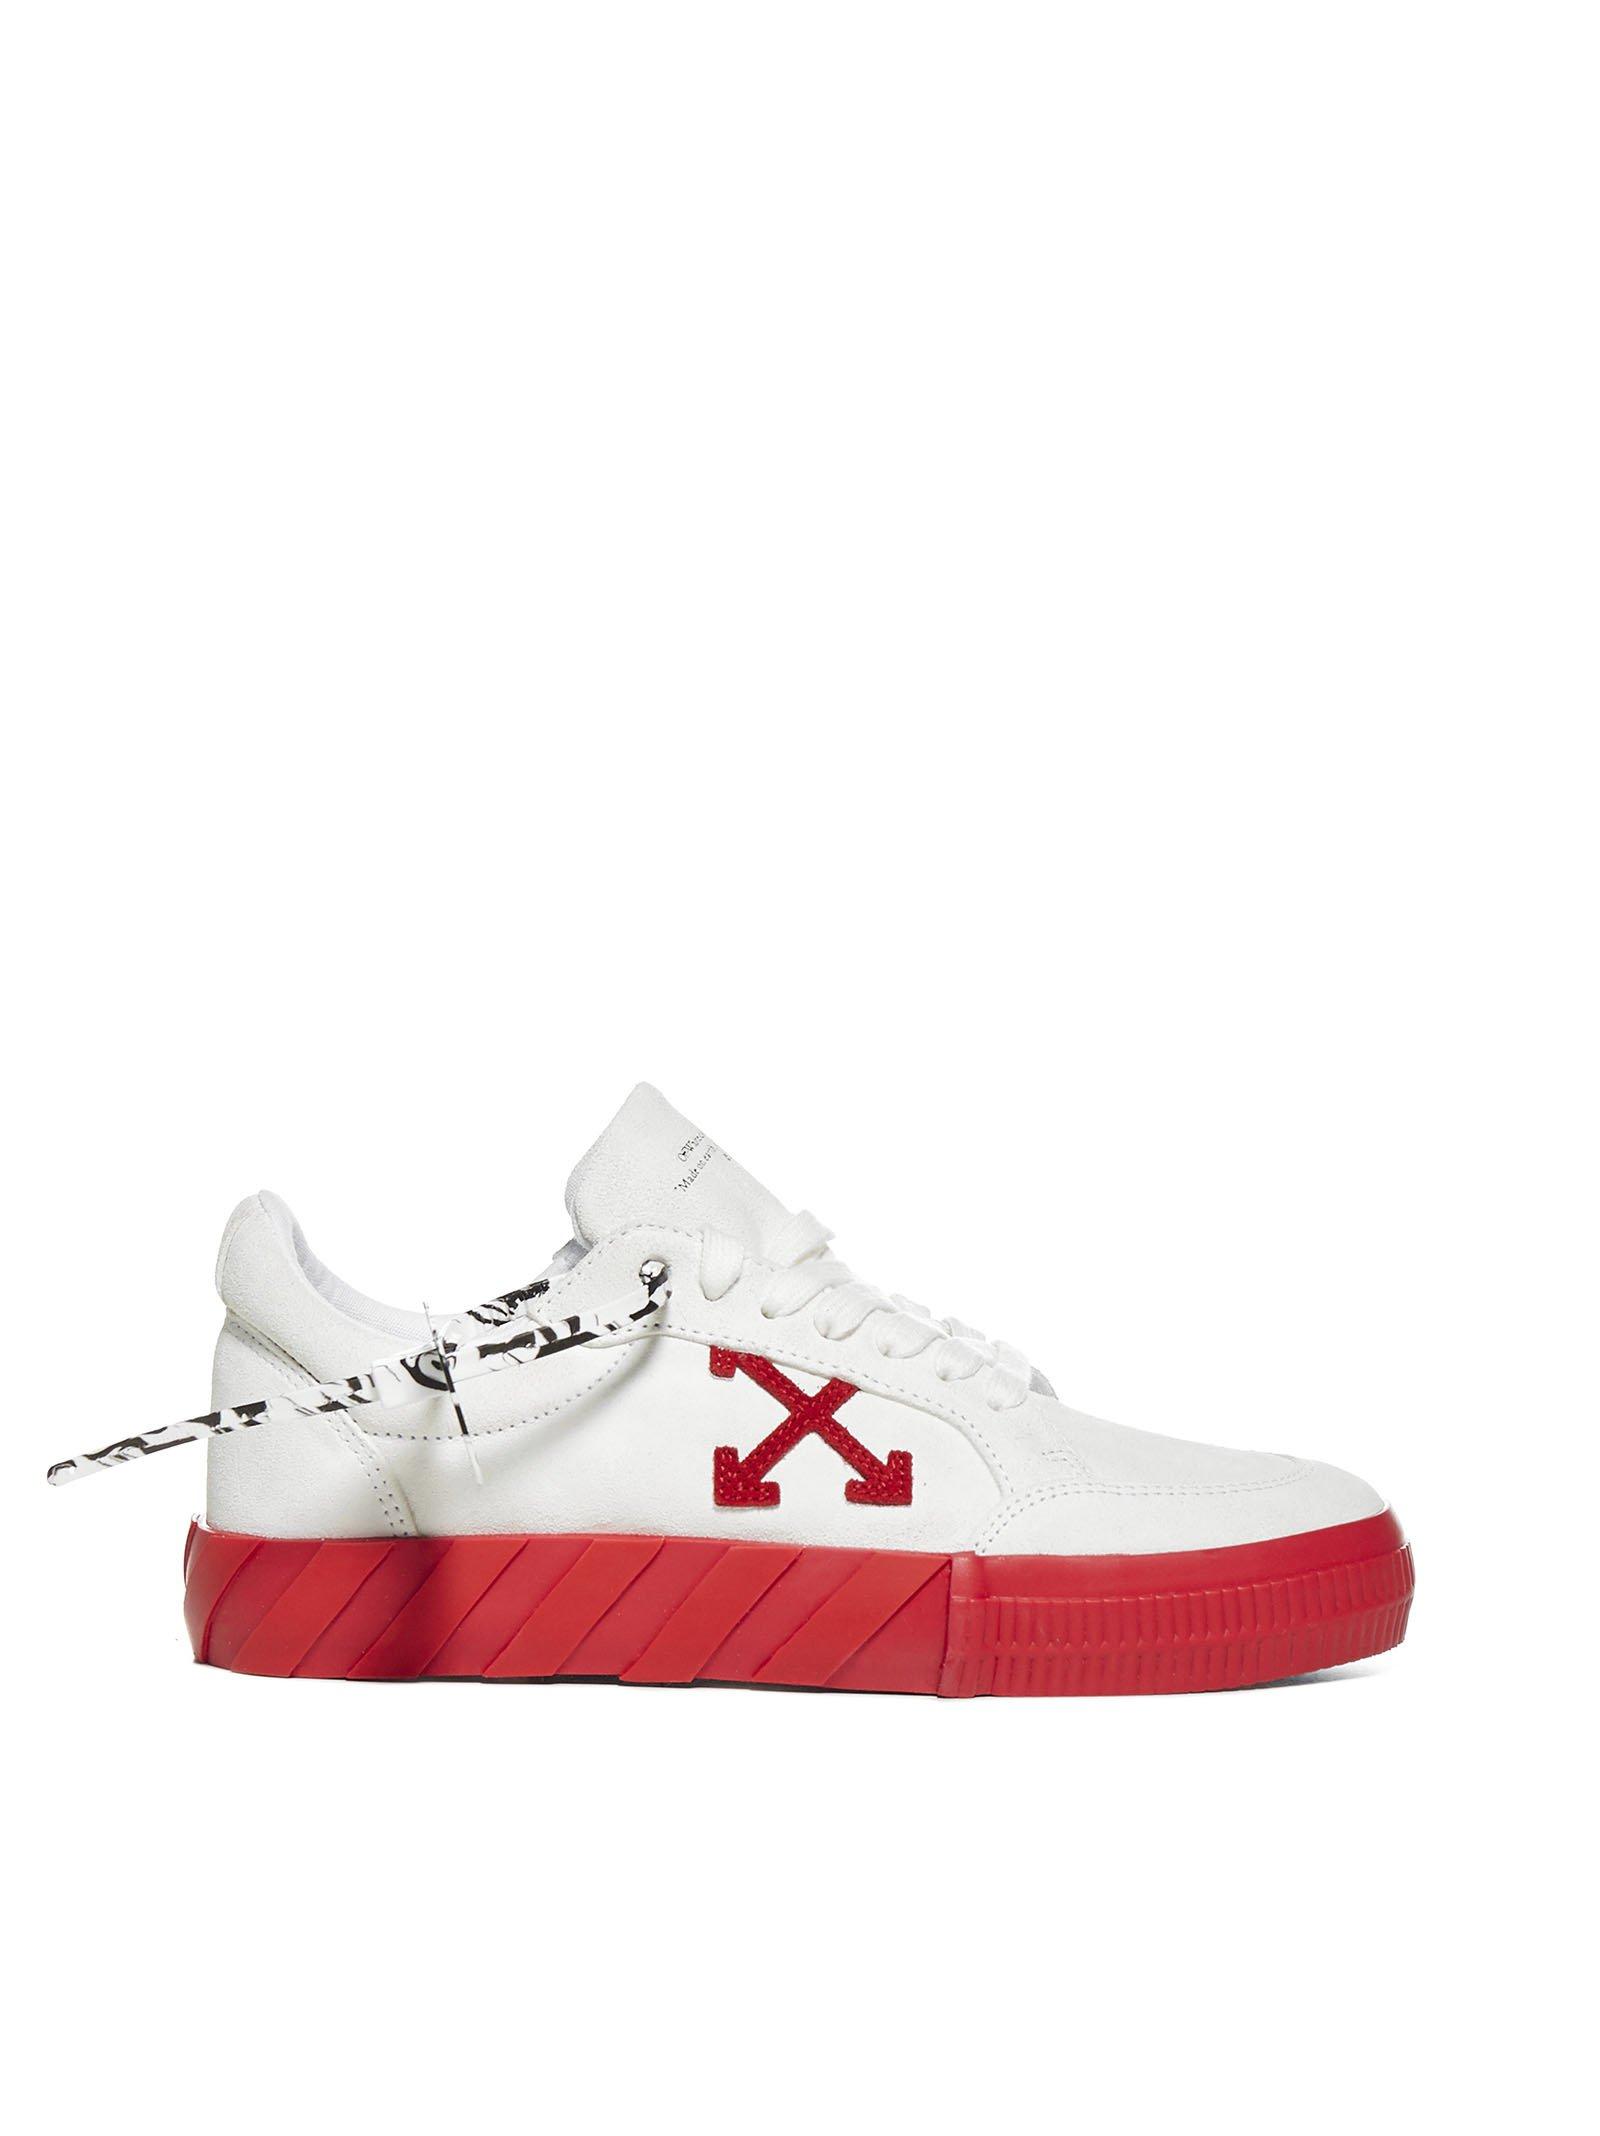 Off-White, Shoes, Off White Co Virgil Abloh